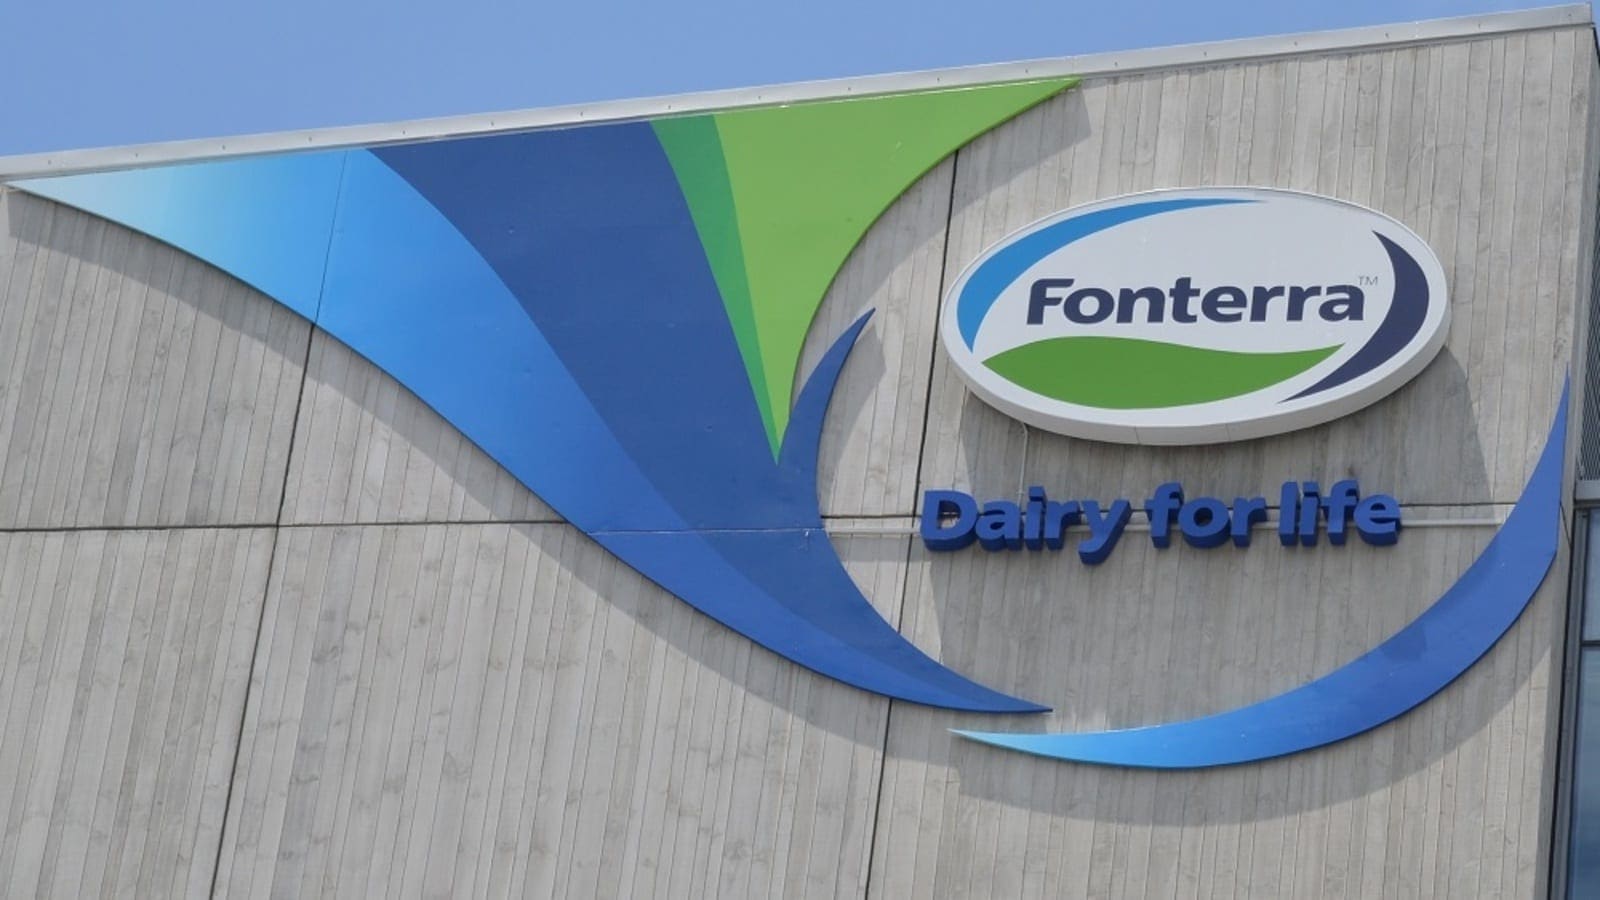 Fonterra’s plan to restructure business receives support from New Zealand Government